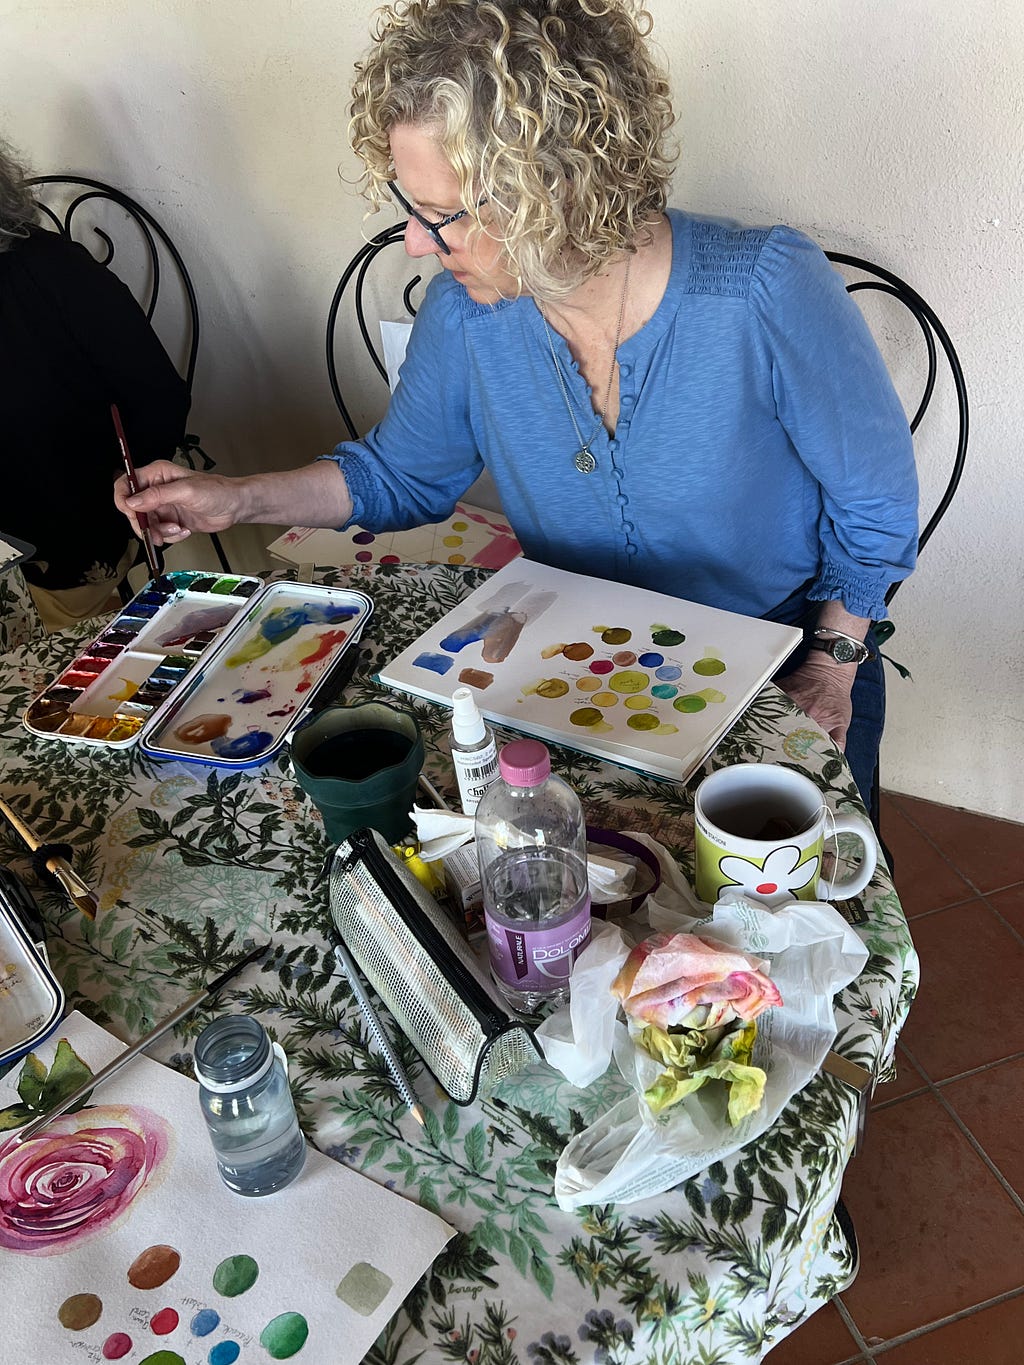 Watercolor artist Roxanne Steed sits at a table spread with palettes, paper, color wheels, and water.